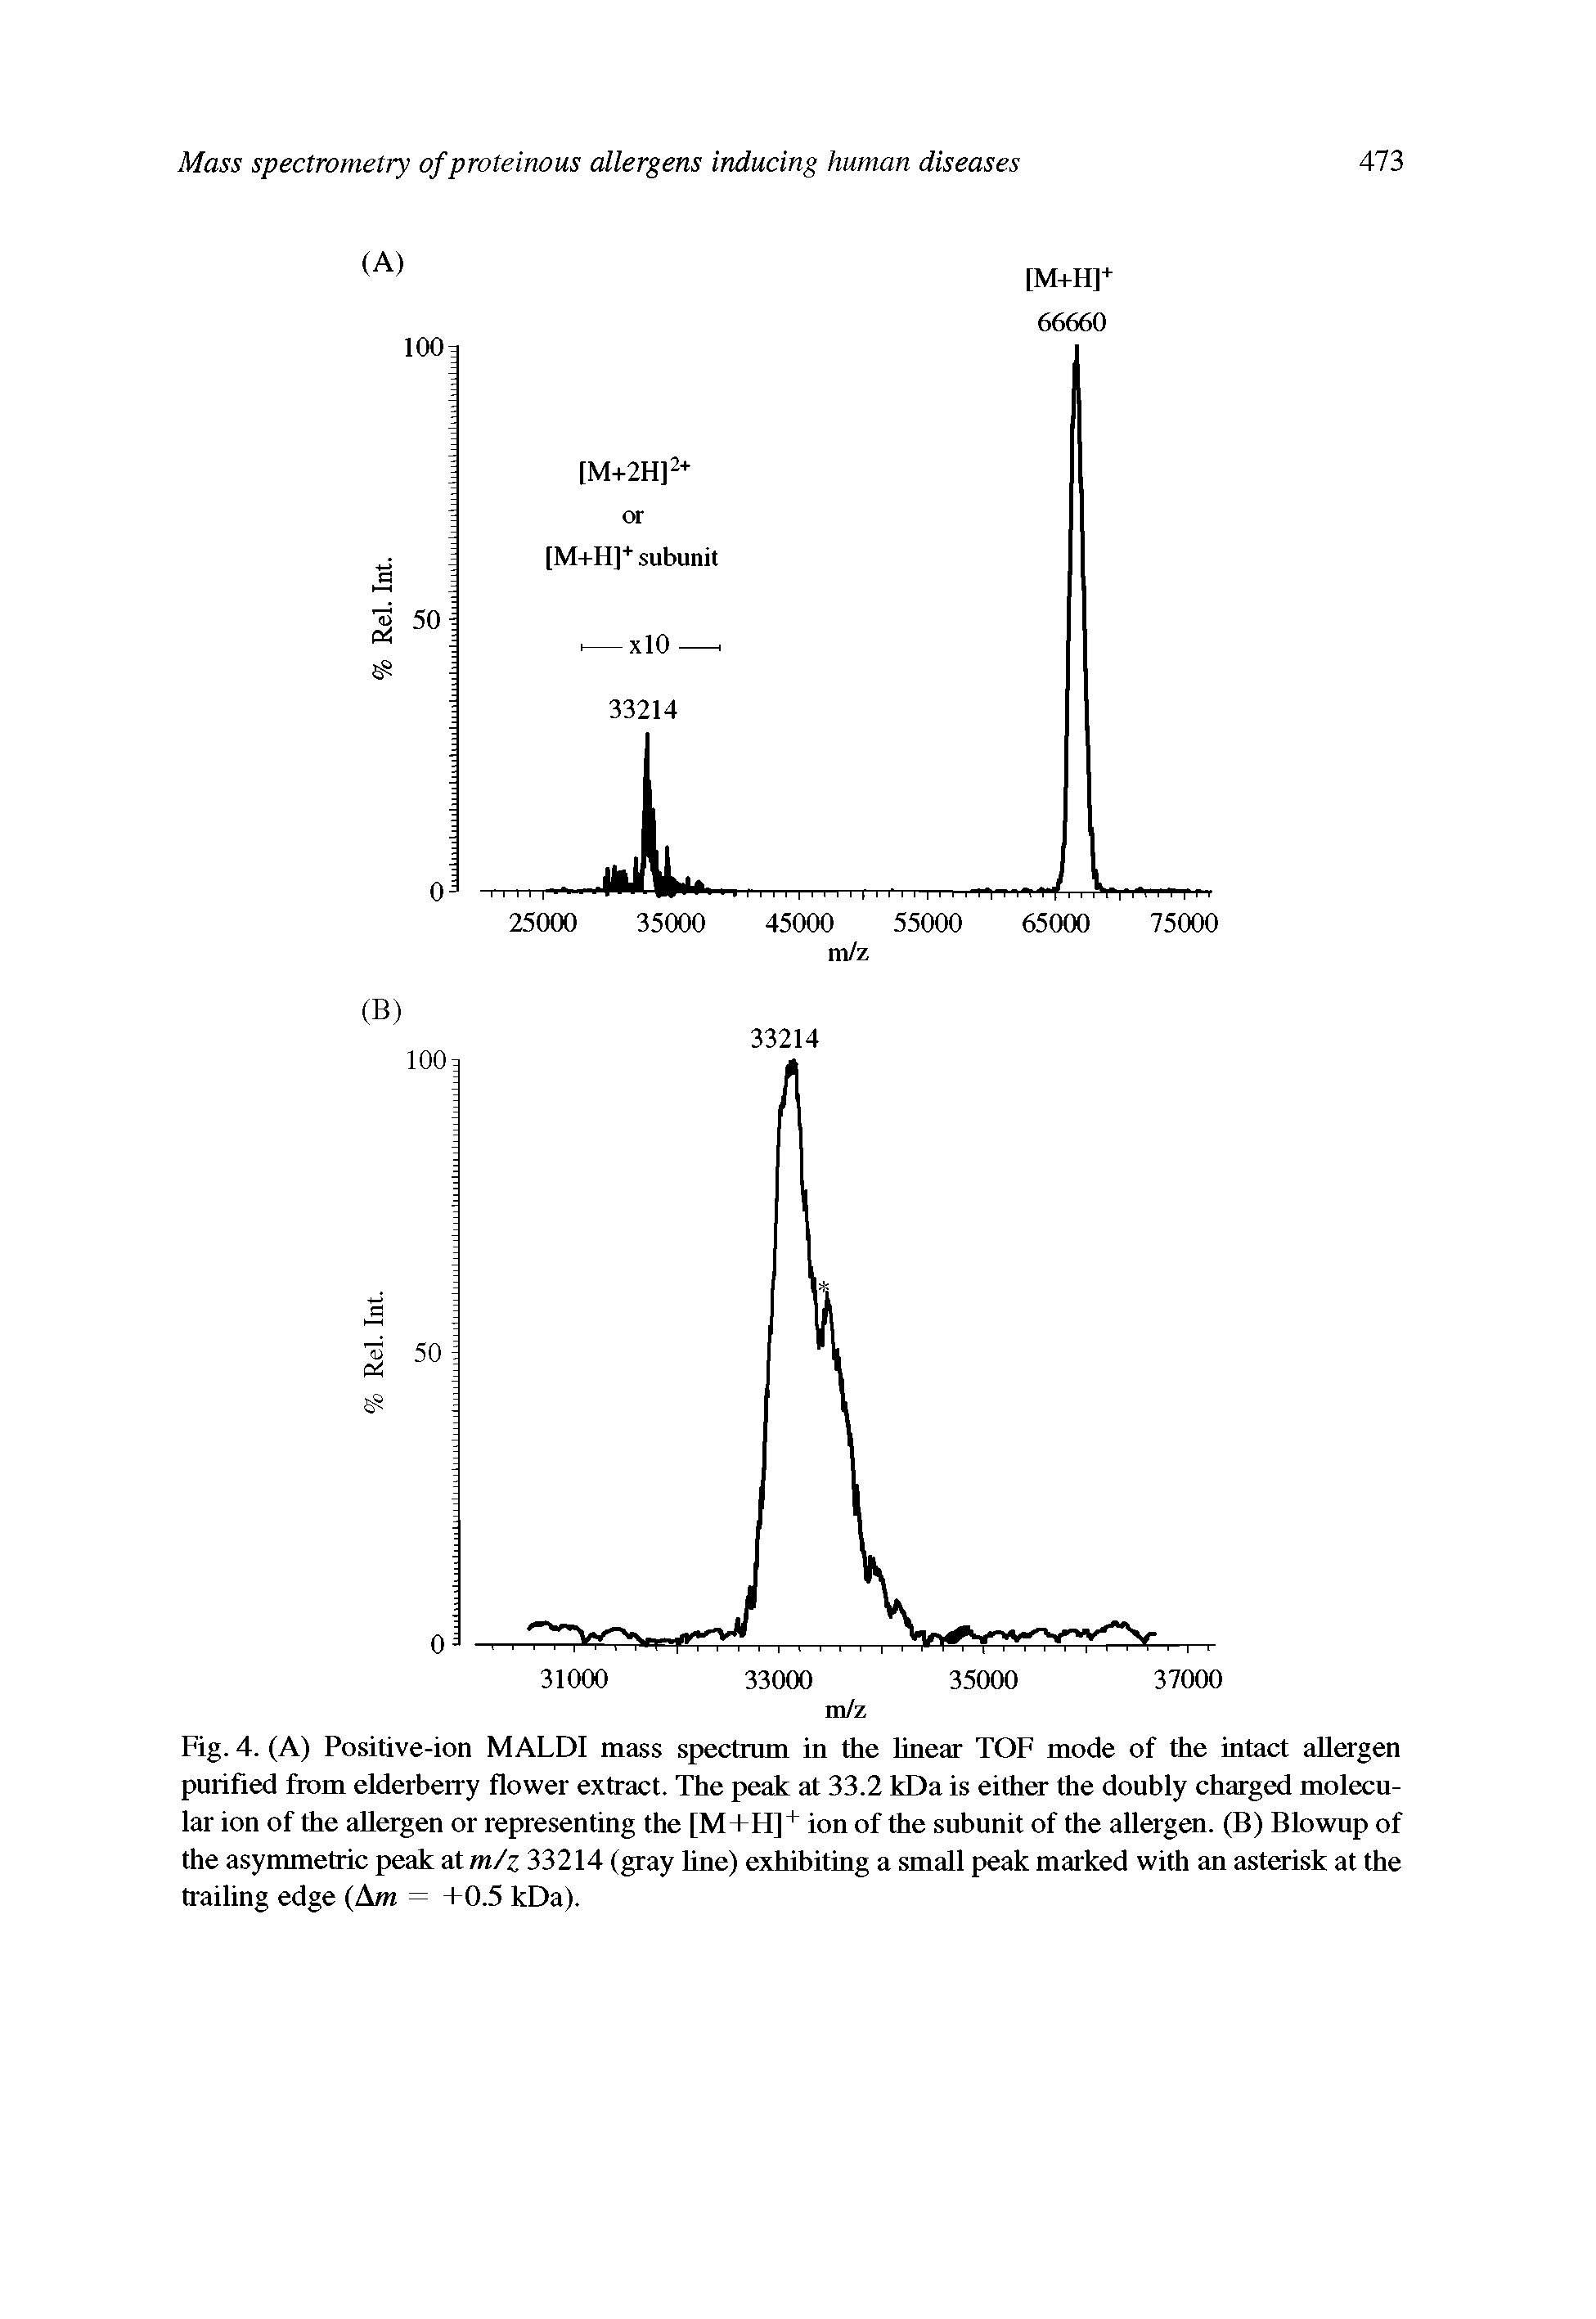 Fig. 4. (A) Positive-ion MALDI mass spectrum in the linear TOF mode of the intact allergen purified from elderberry flower extract. The peak at 33.2 kDa is either the doubly charged molecular ion of the allergen or representing the [M+H] ion of the subunit of the allergen. (B) Blowup of the asymmetric peak at m/z 33214 (gray hue) exhibiting a small peak marked with an asterisk at the trailing edge (Am = +0.5 kDa).